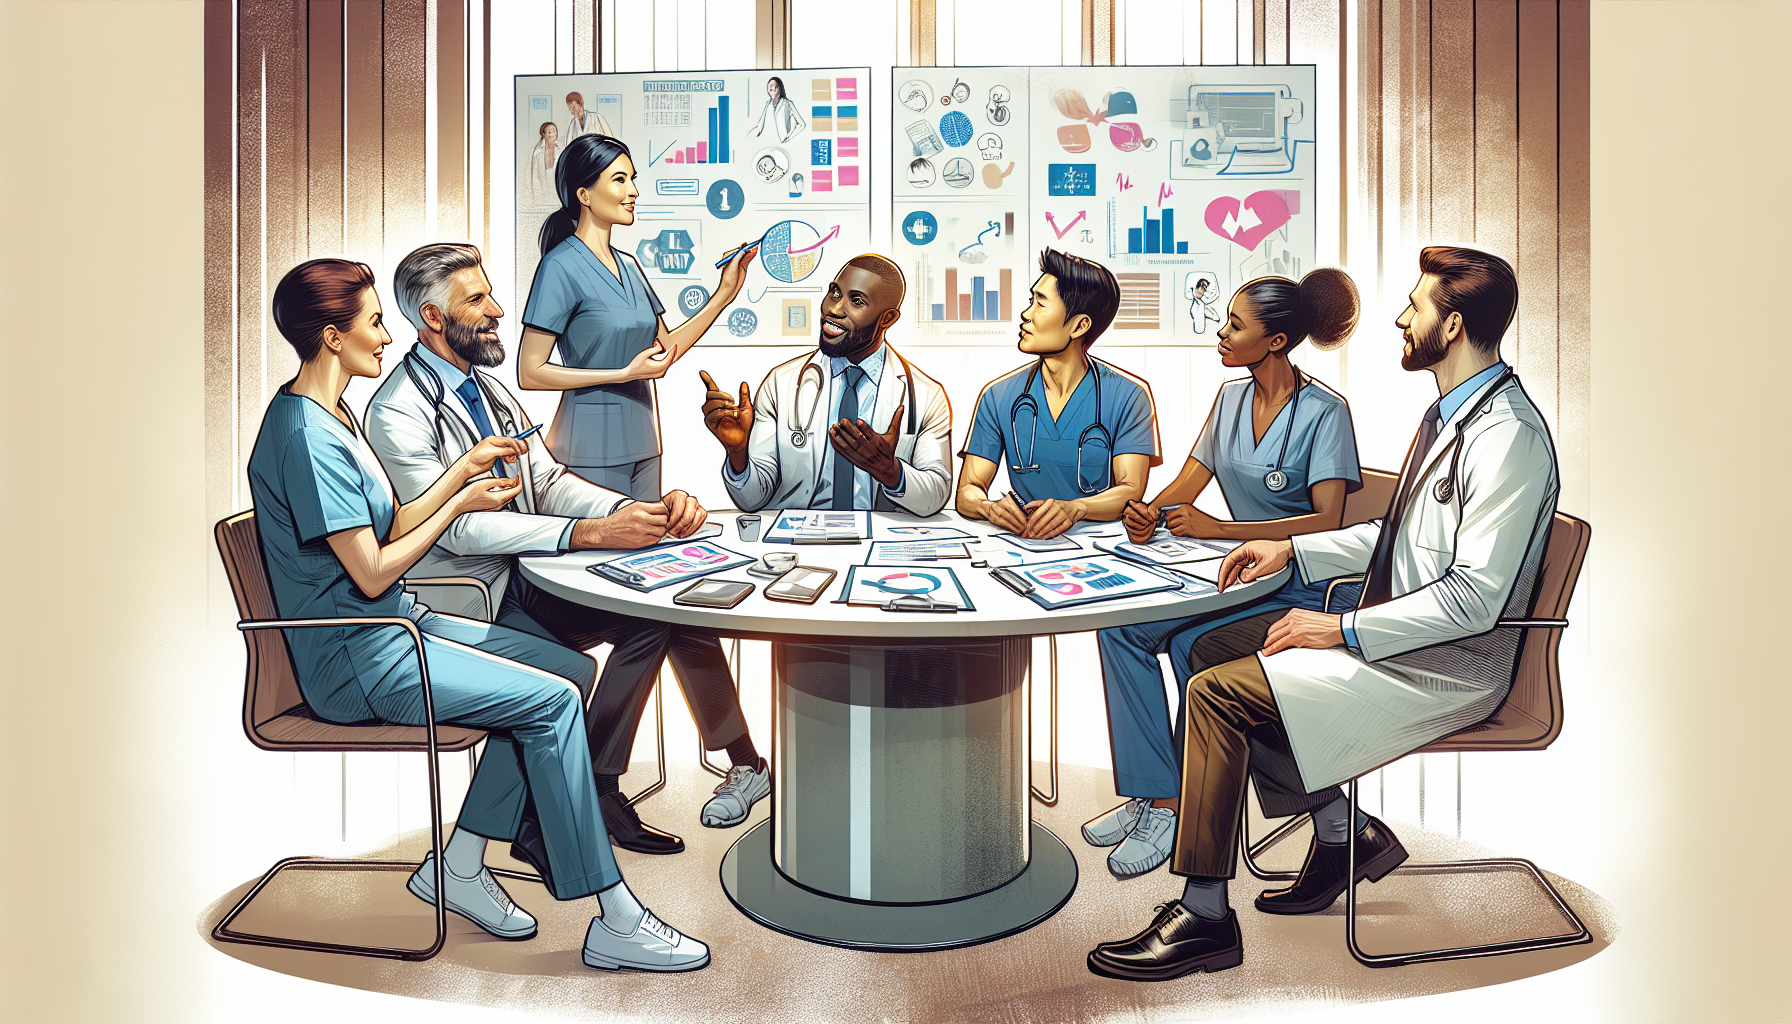 Illustration of healthcare professionals discussing marketing strategies